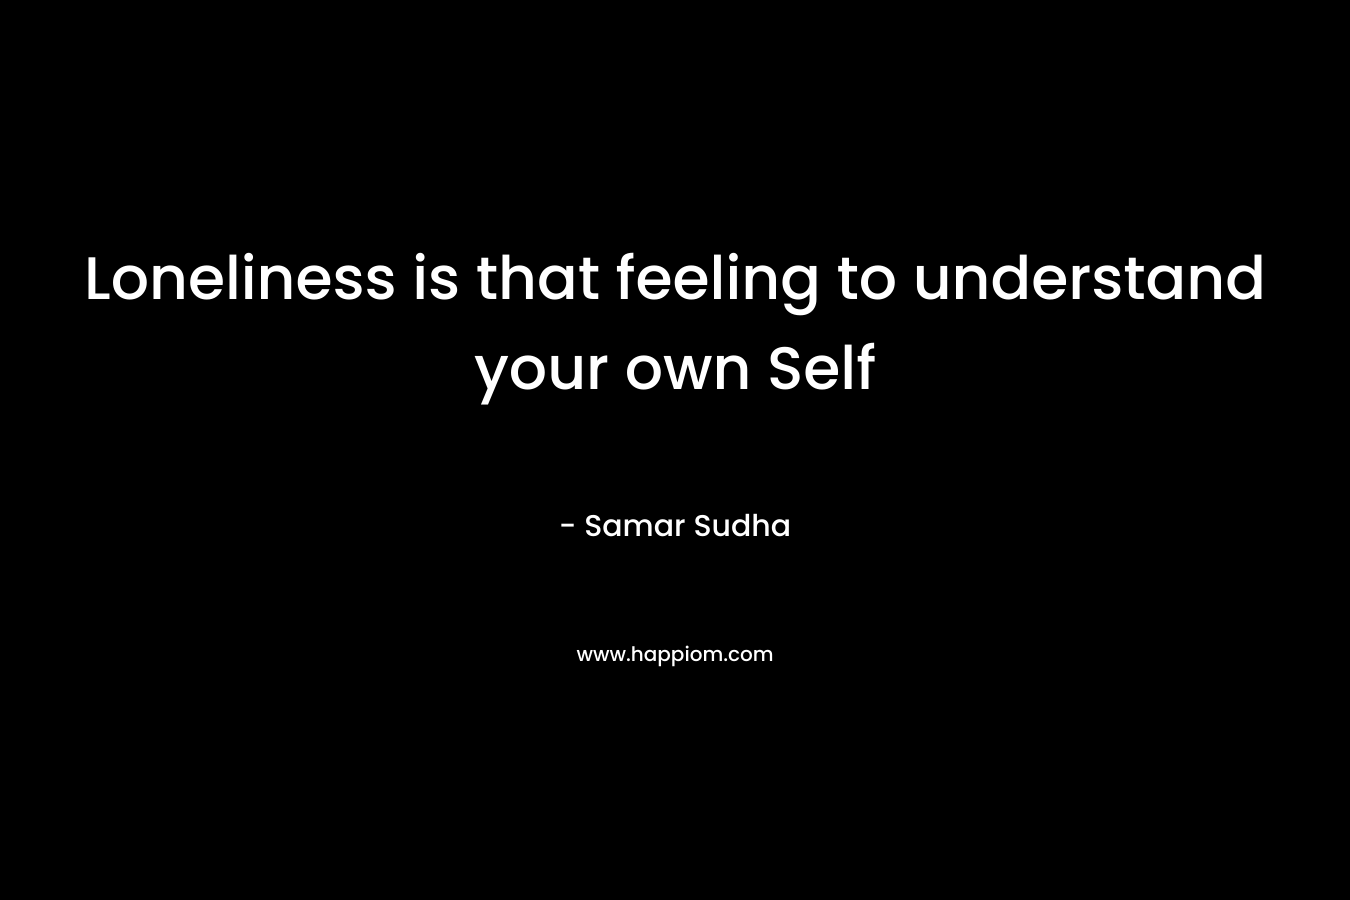 Loneliness is that feeling to understand your own Self – Samar Sudha